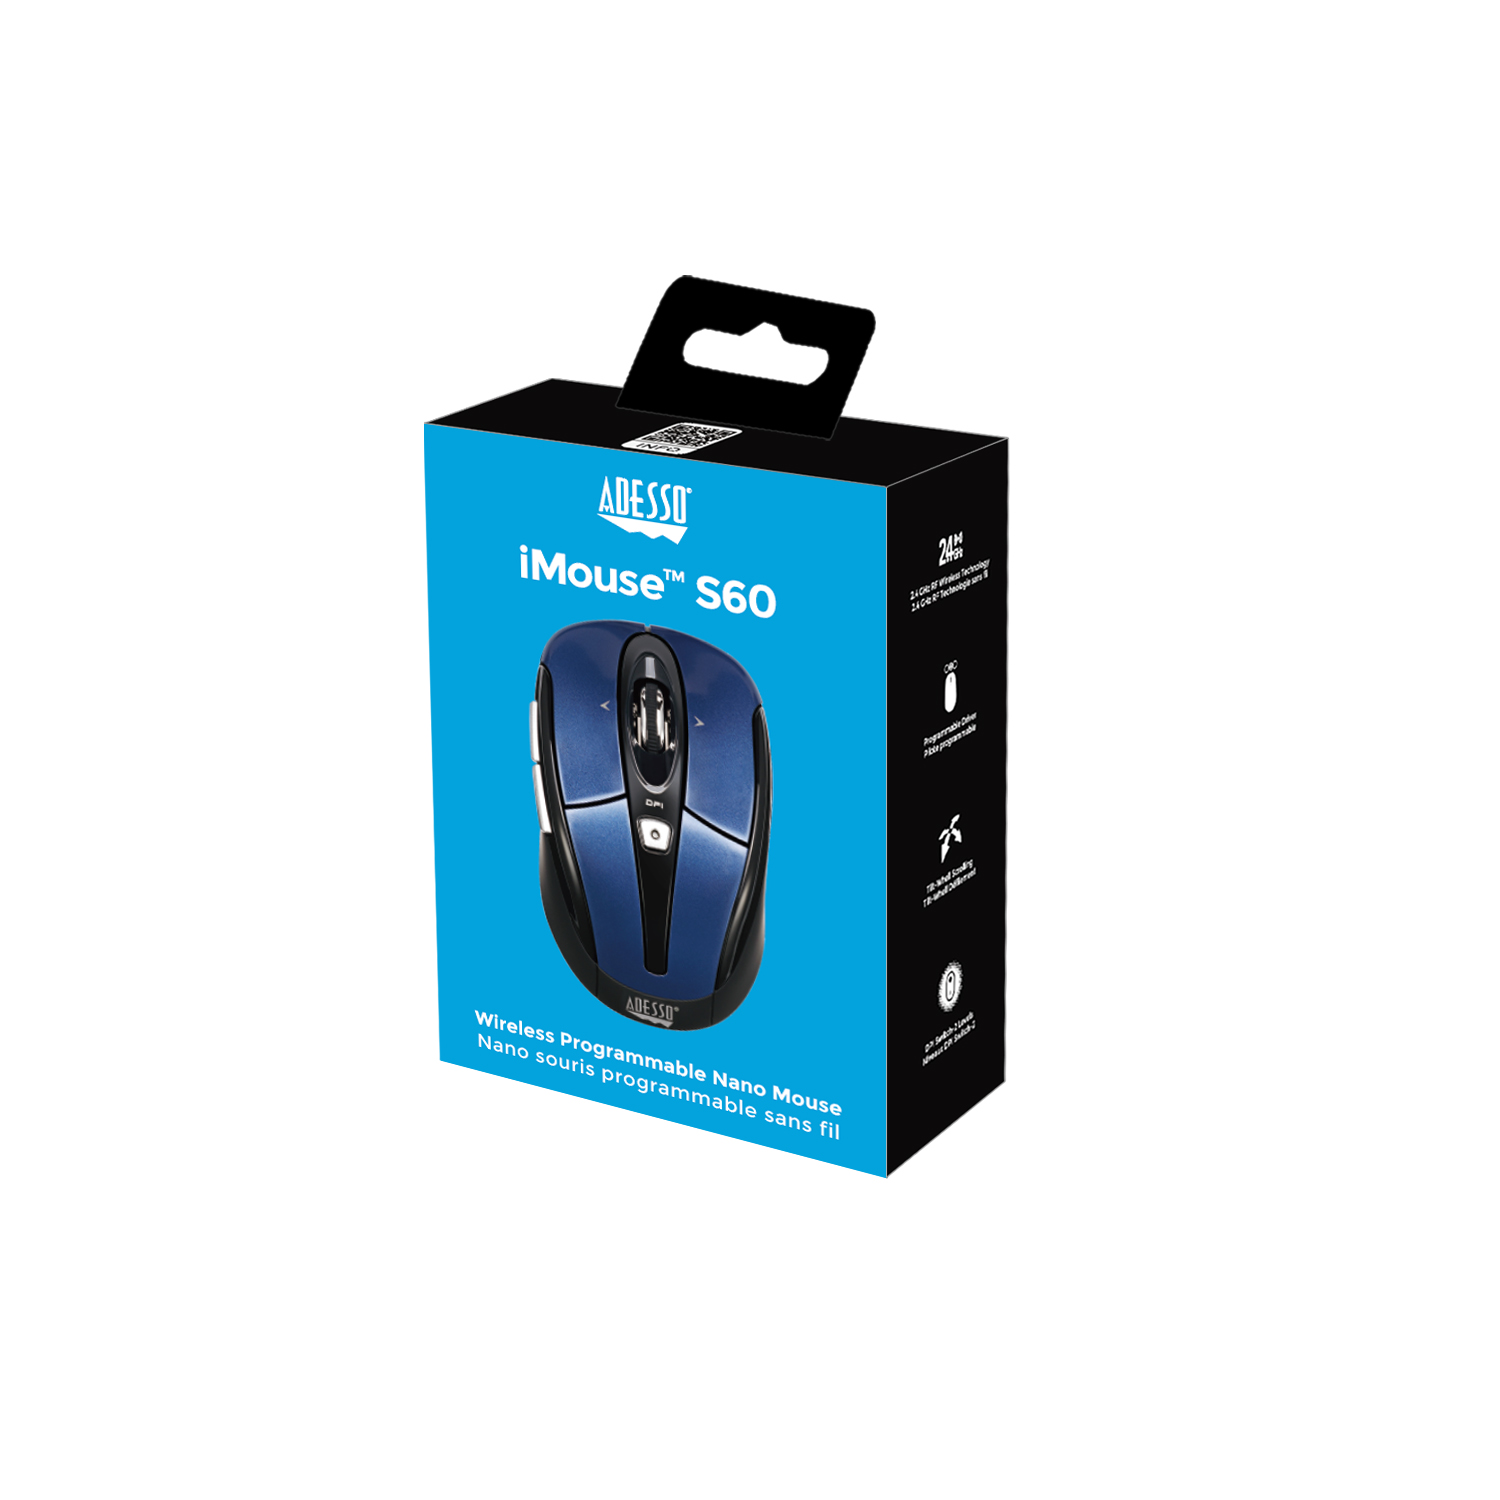 2.4 GHz Wireless Programmable Nano Mouse - Adesso